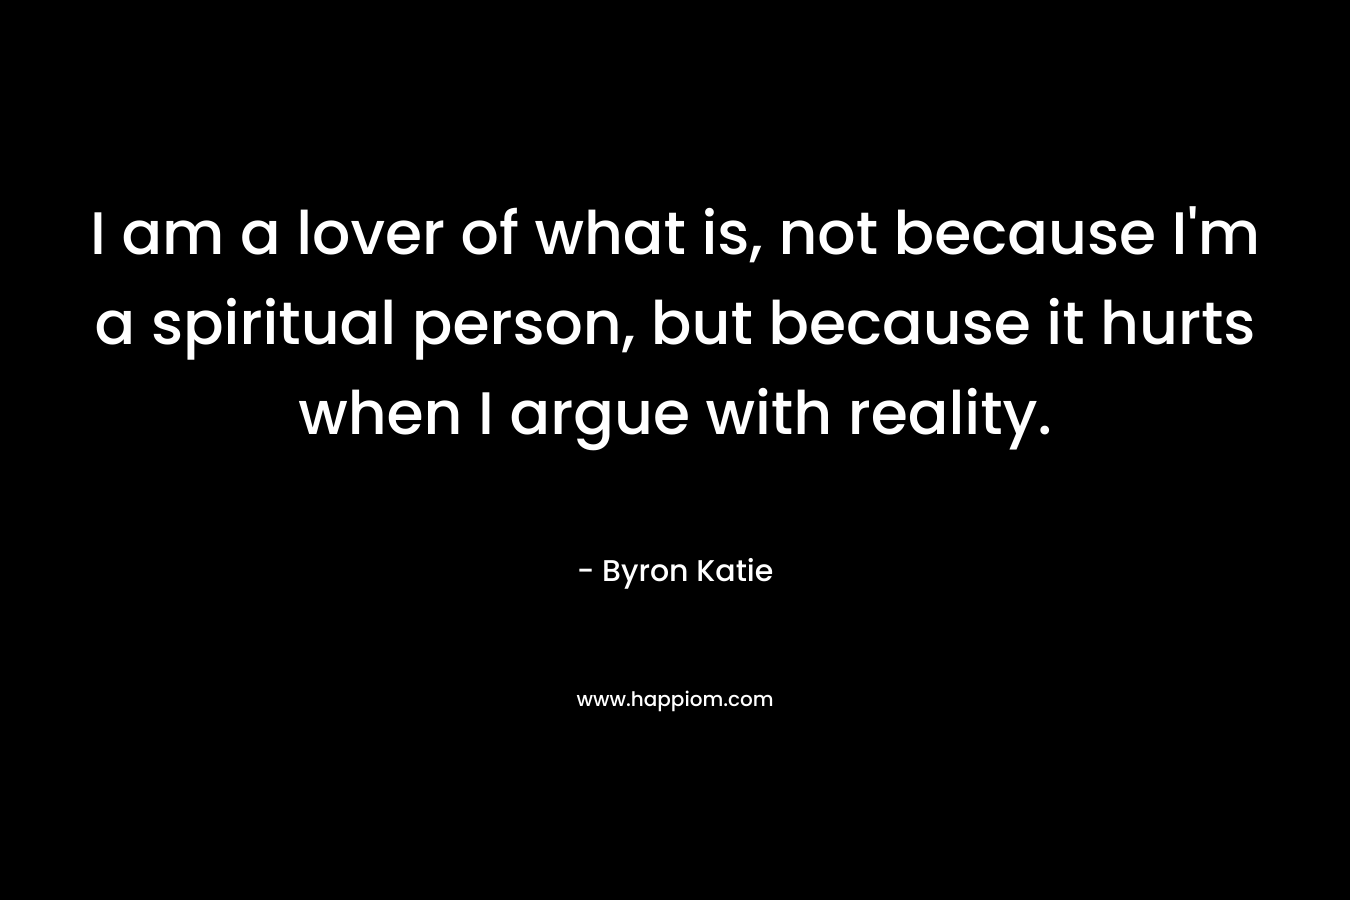 I am a lover of what is, not because I'm a spiritual person, but because it hurts when I argue with reality.